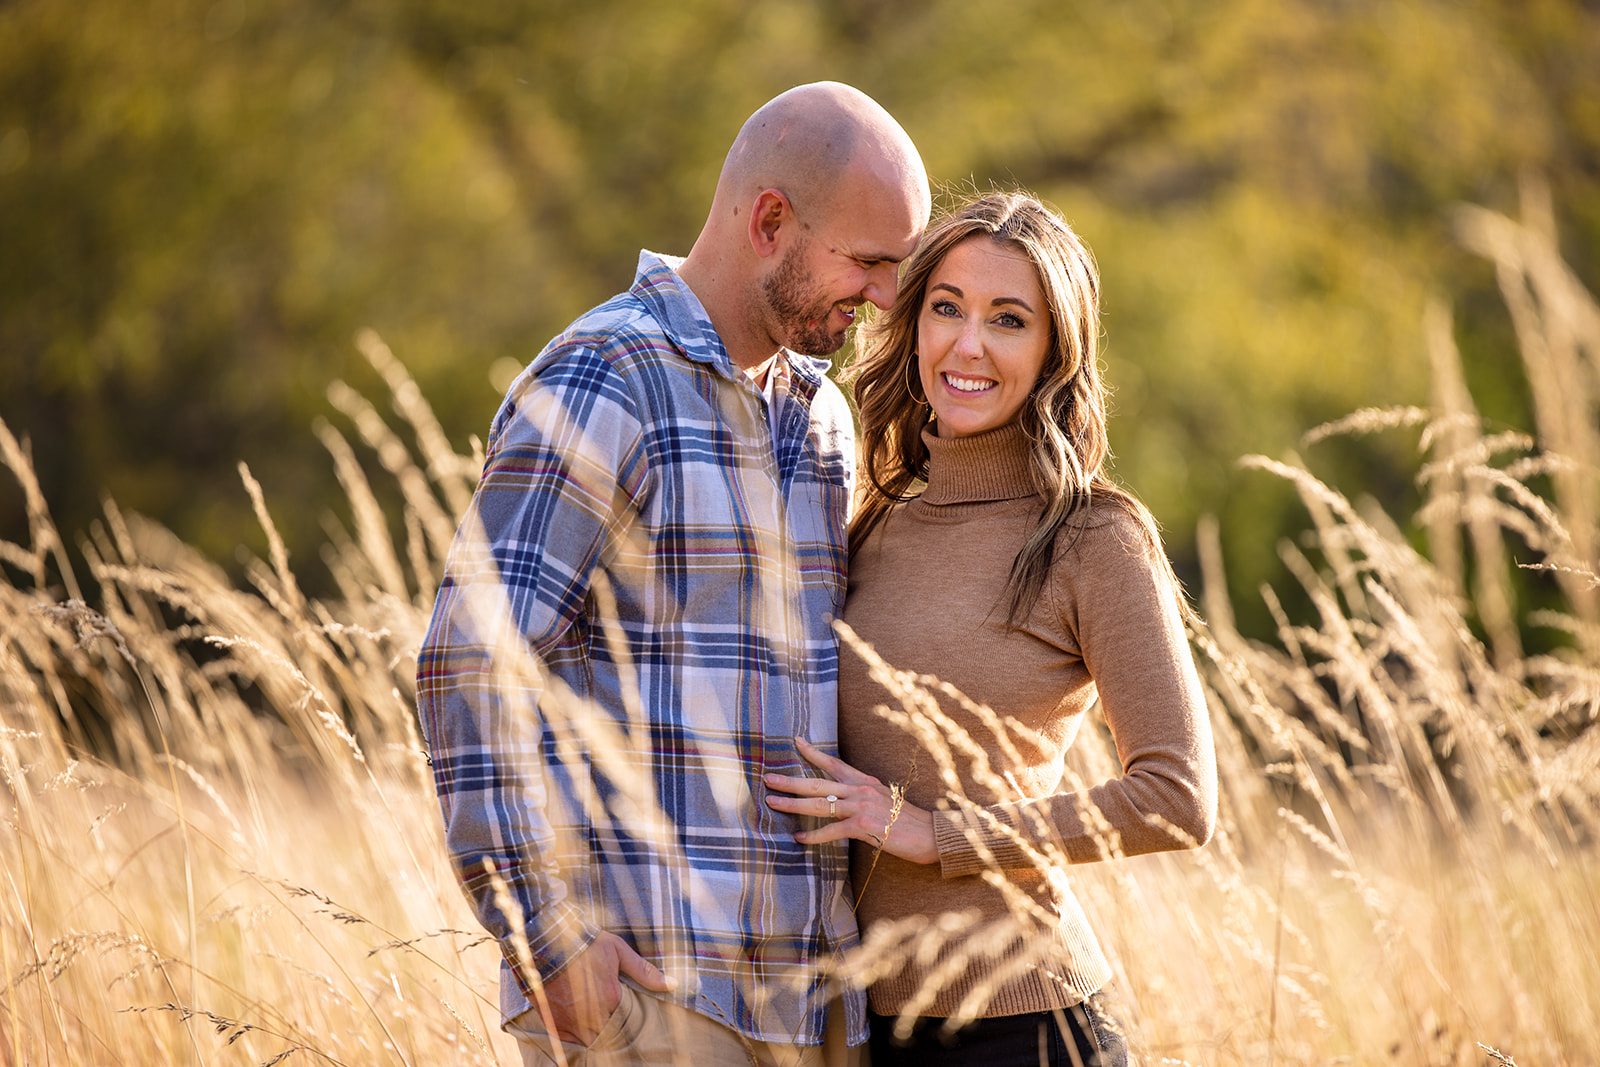 Sunlit Romance: Perrot State Park Engagement Session by Jeff Wiswell